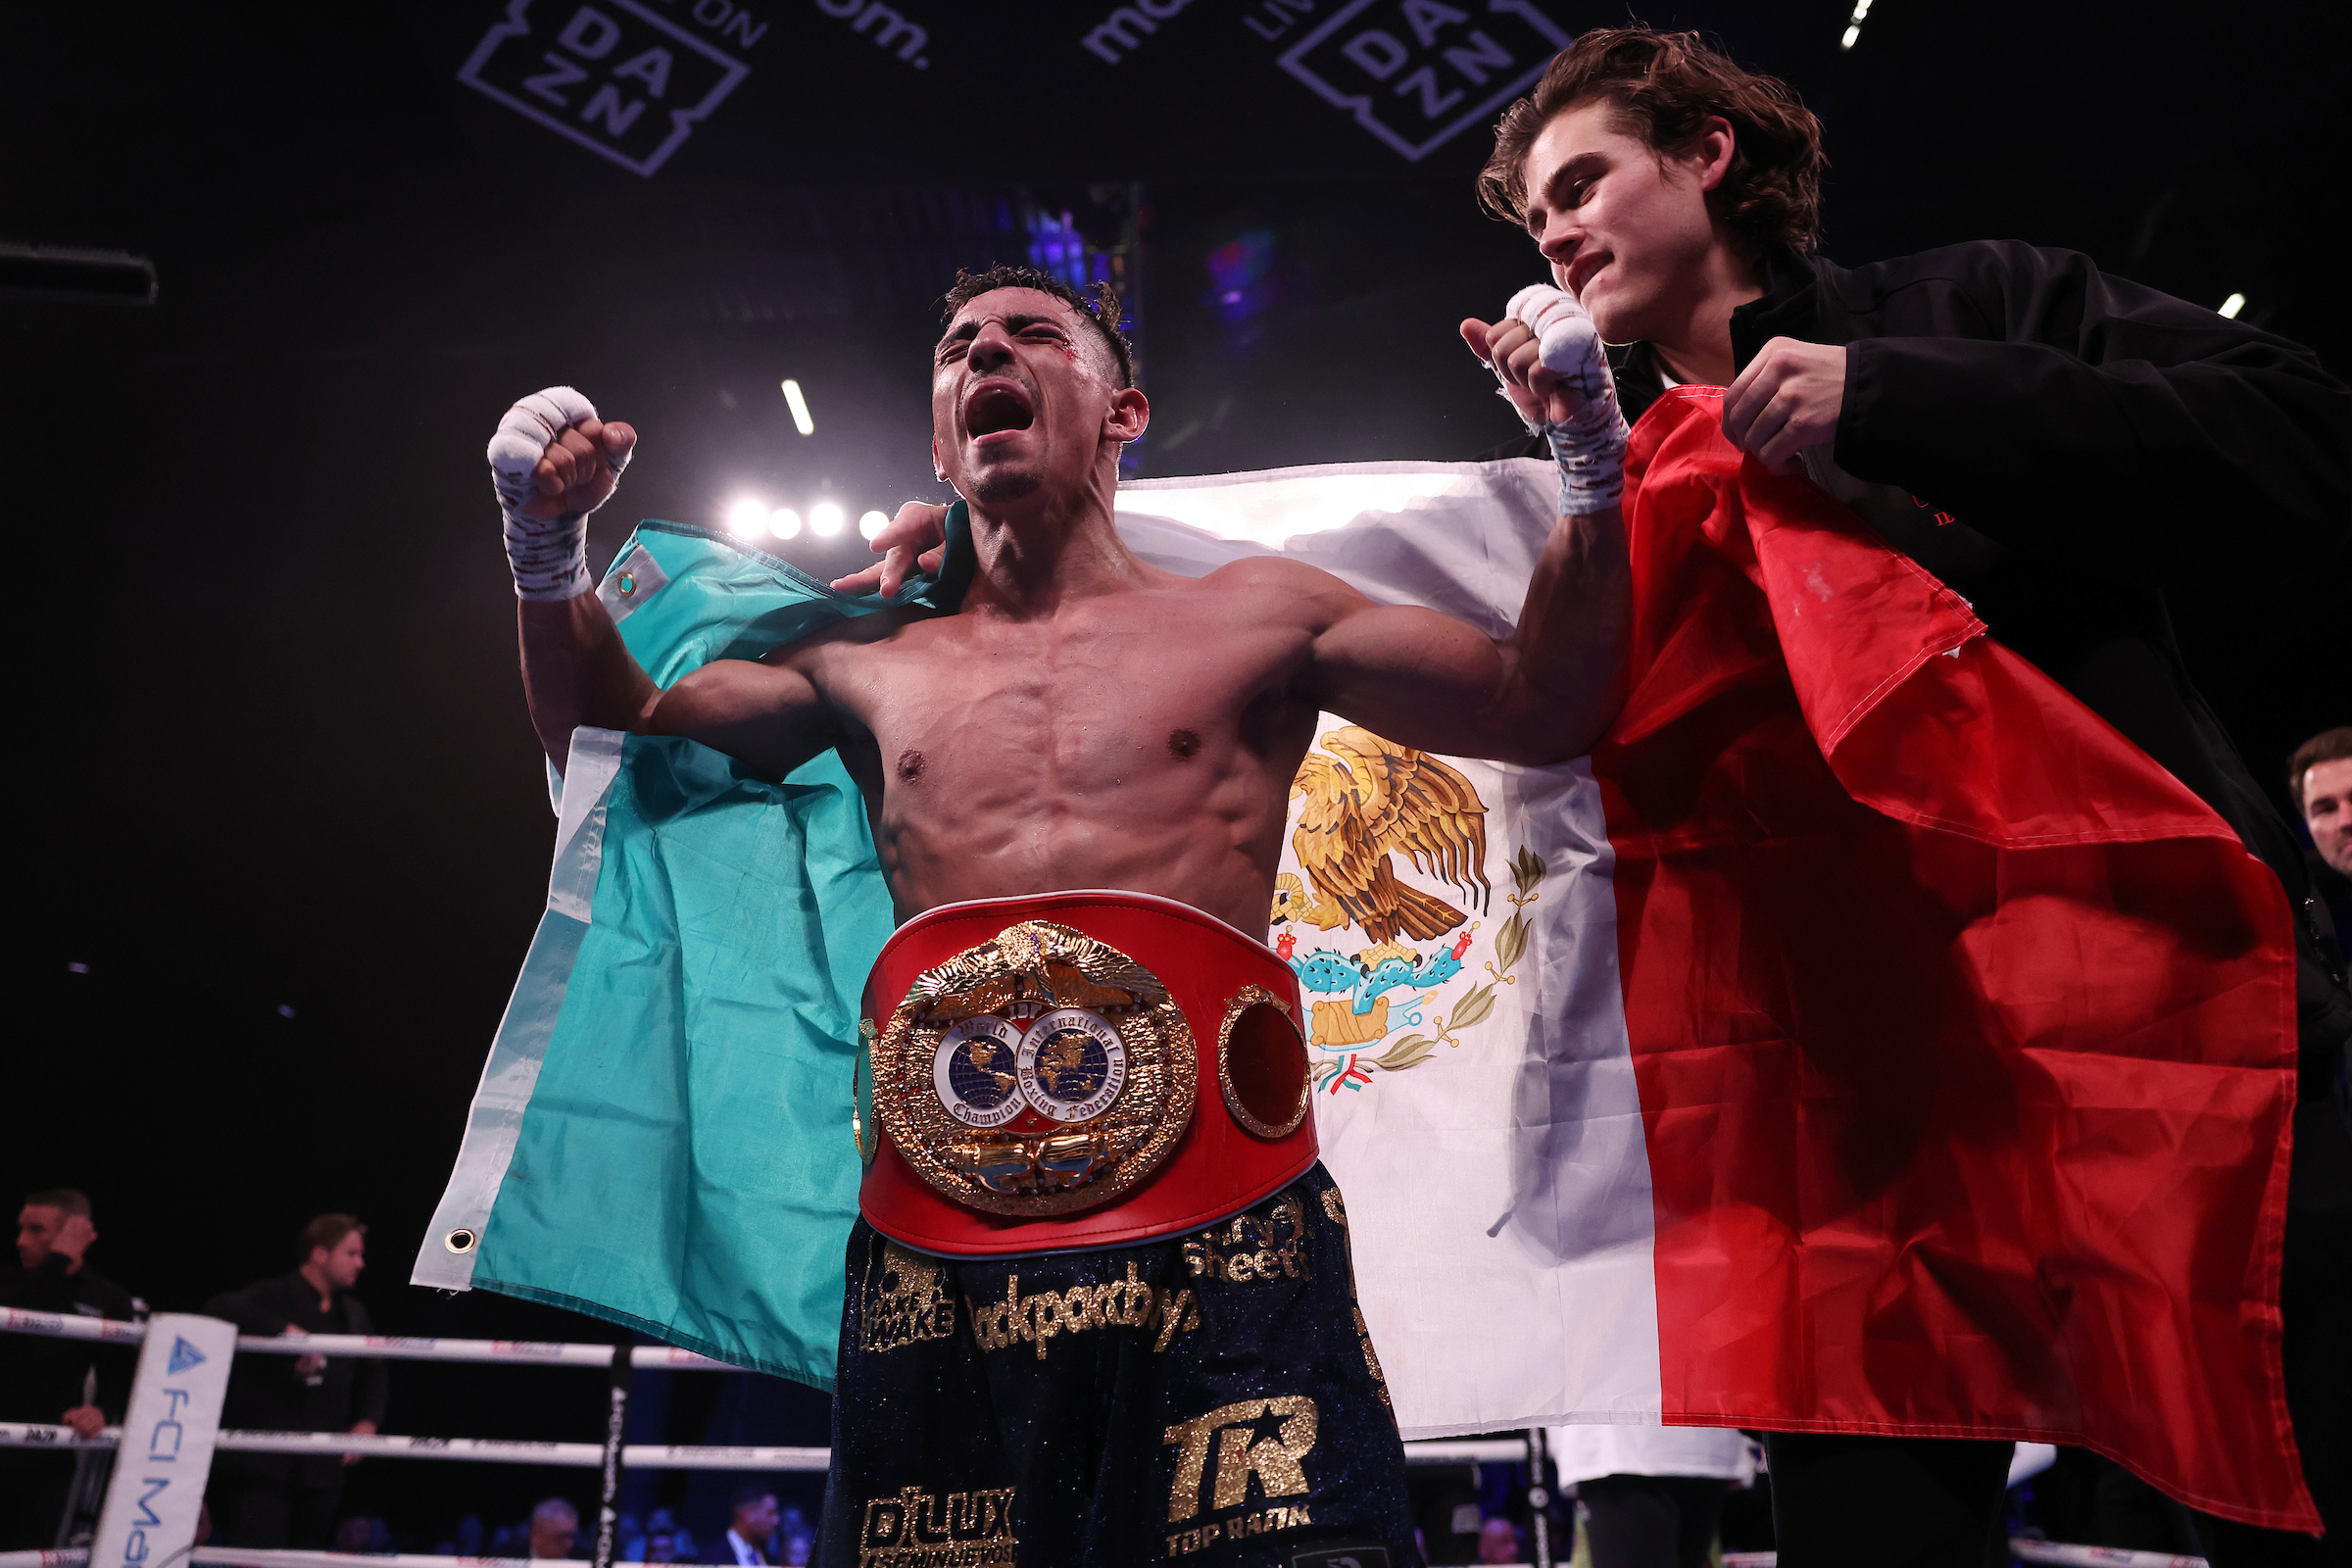 Luis Alberto Lopez risks his belt vs Reiya Abe with an eye on future unifications